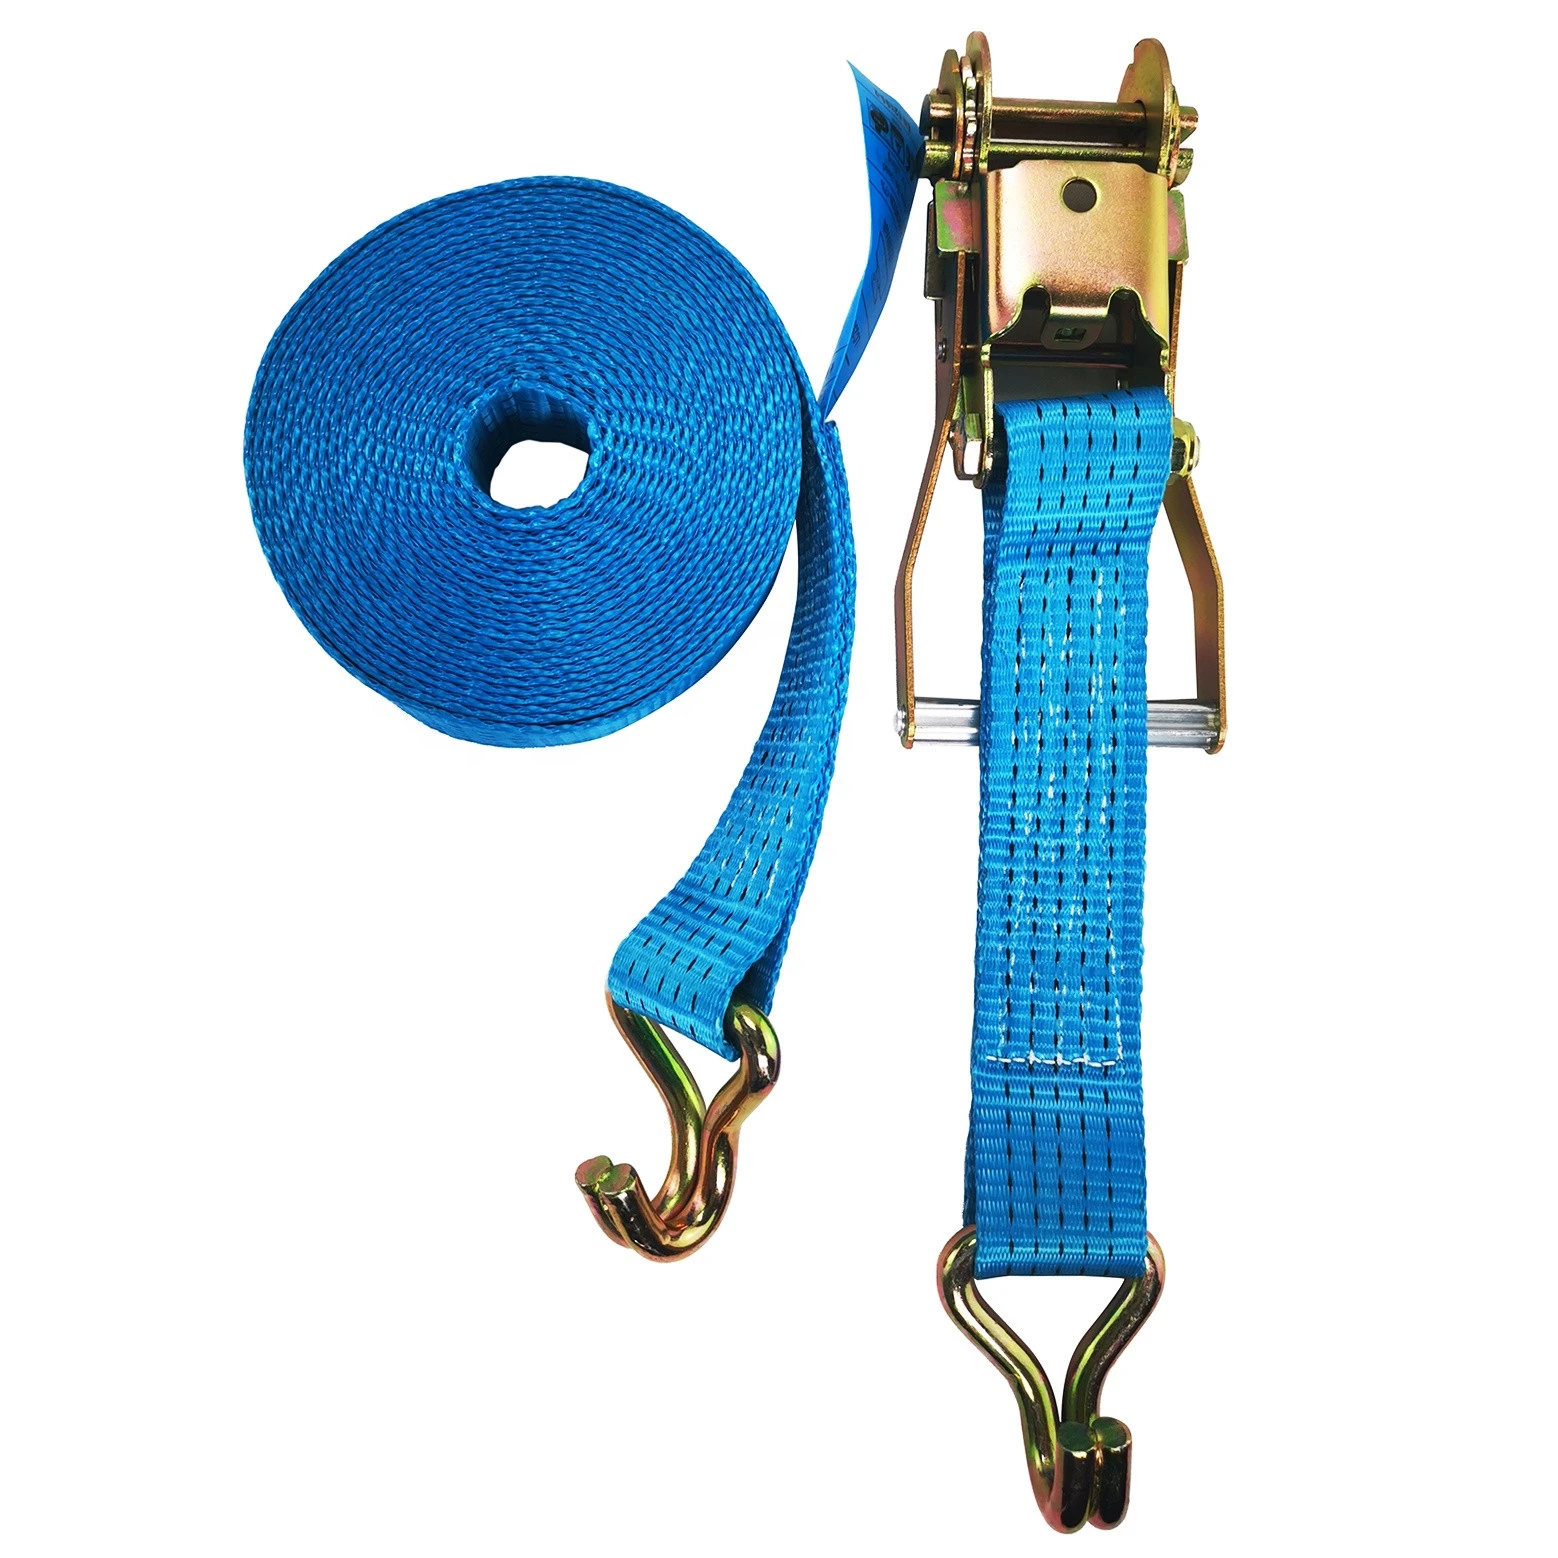 Retractable Heavy Duty Cargo Lashing Polyester Ratchet Strap Ratchet Tie Down Straps With J Hooks